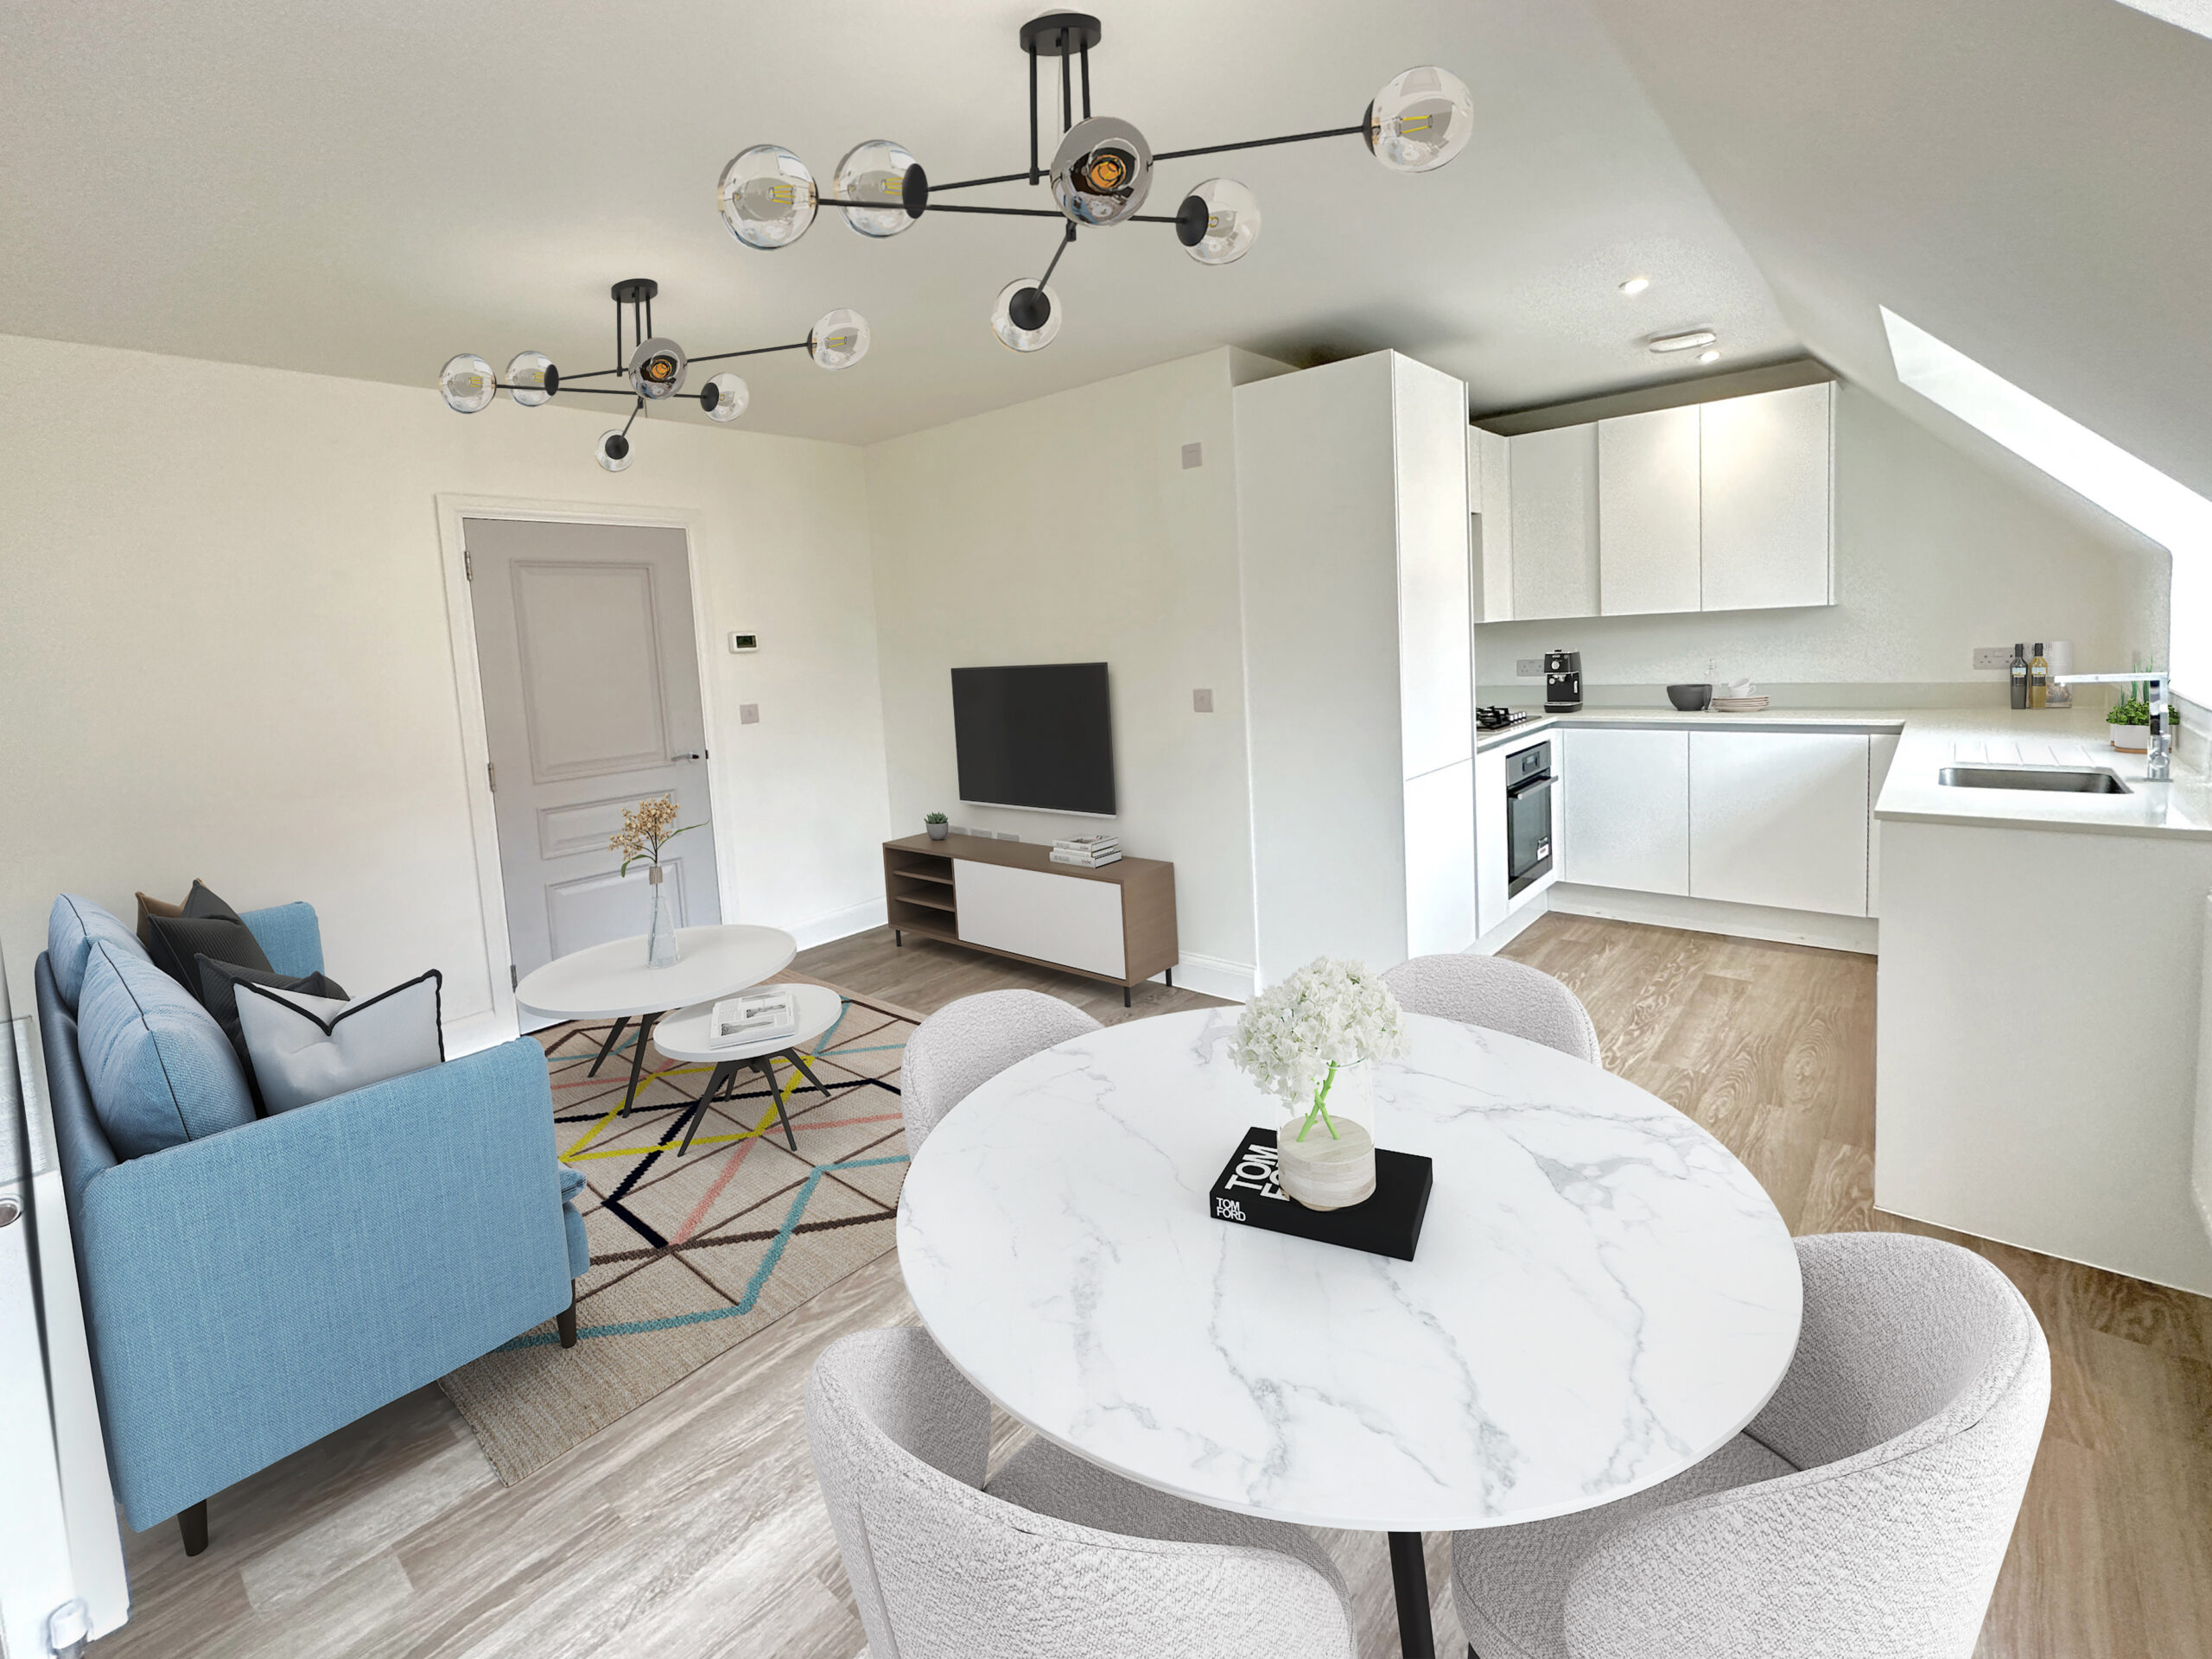 Image of the living and dining area at Wilton Park - available to purchase through Shared Ownership on Share to Buy!